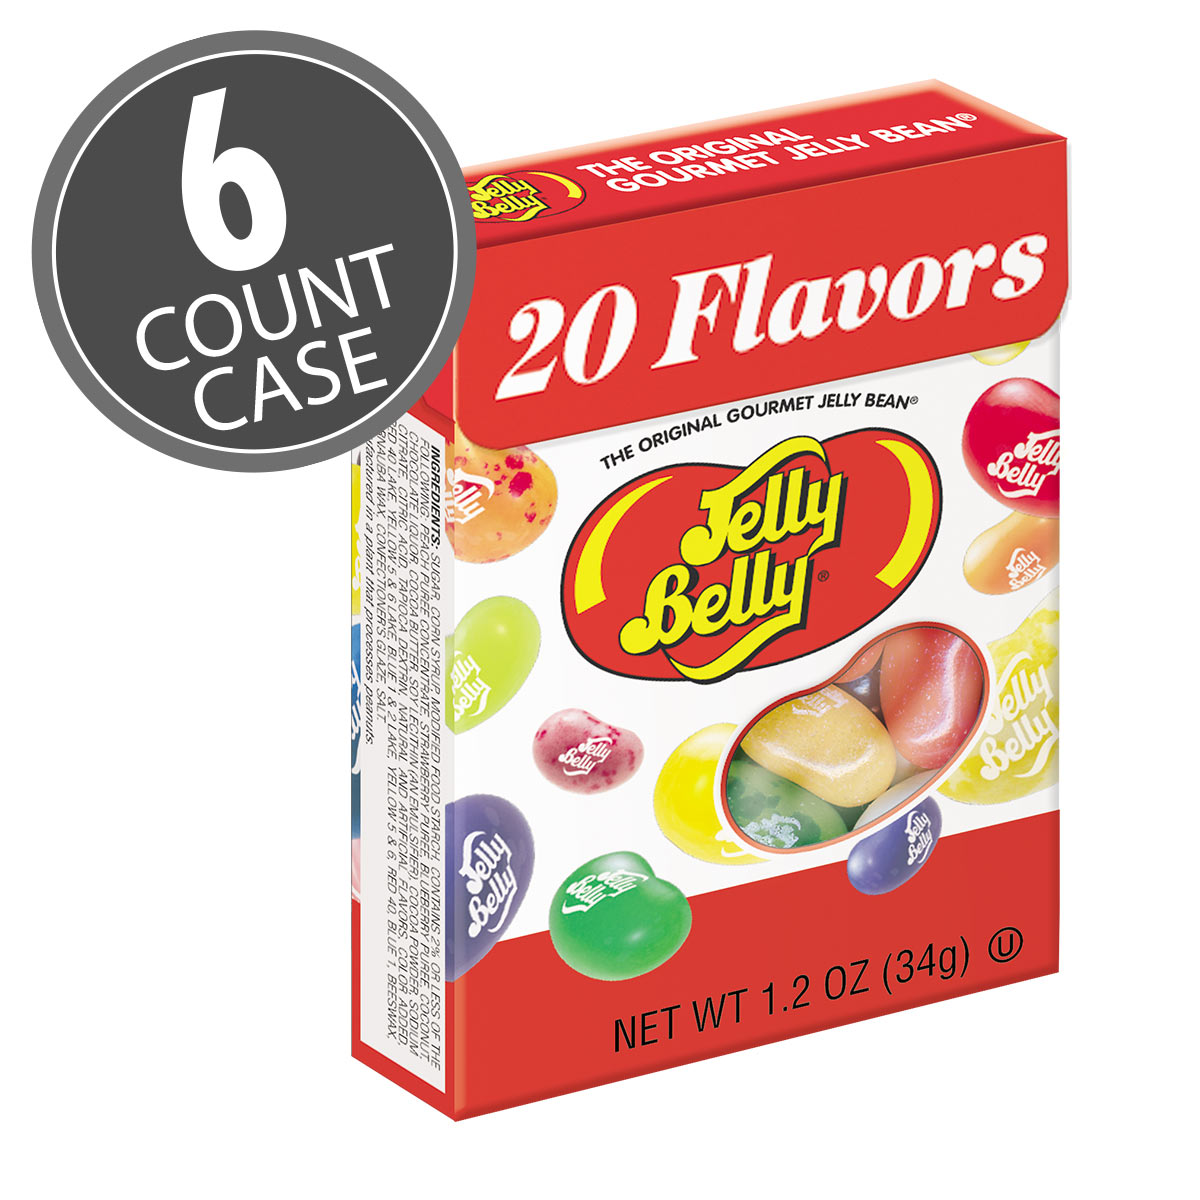 Jelly Belly Assorted jelly beans in small boxes. 20 assorted flavors. Great candy for a party or giveaways.